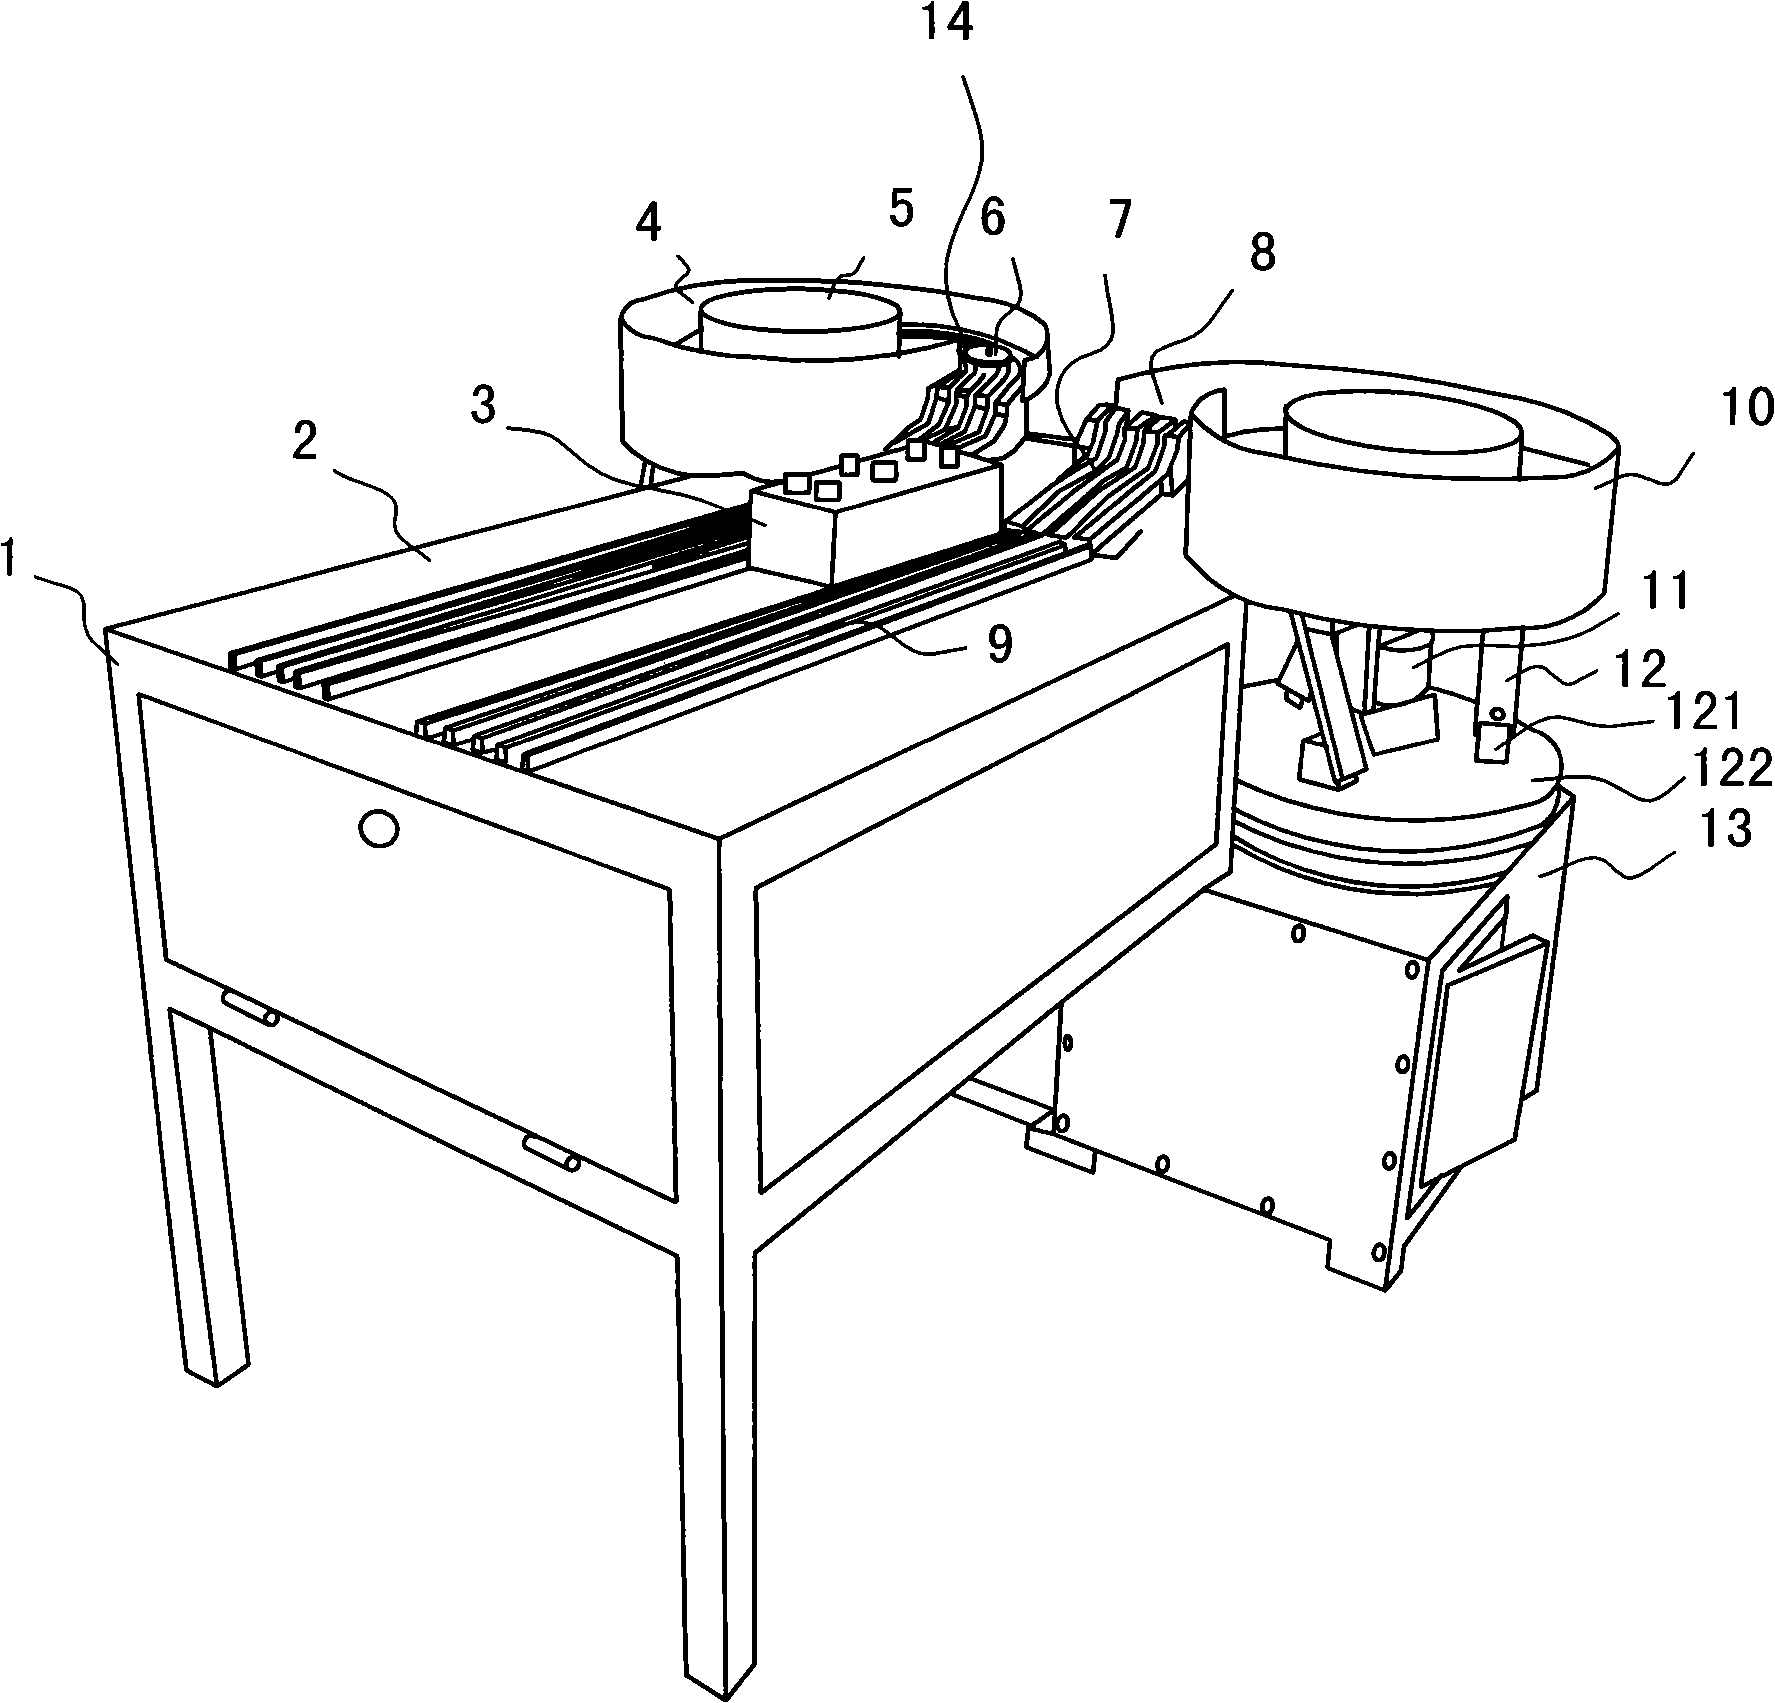 Machine for stringing chain-sheets